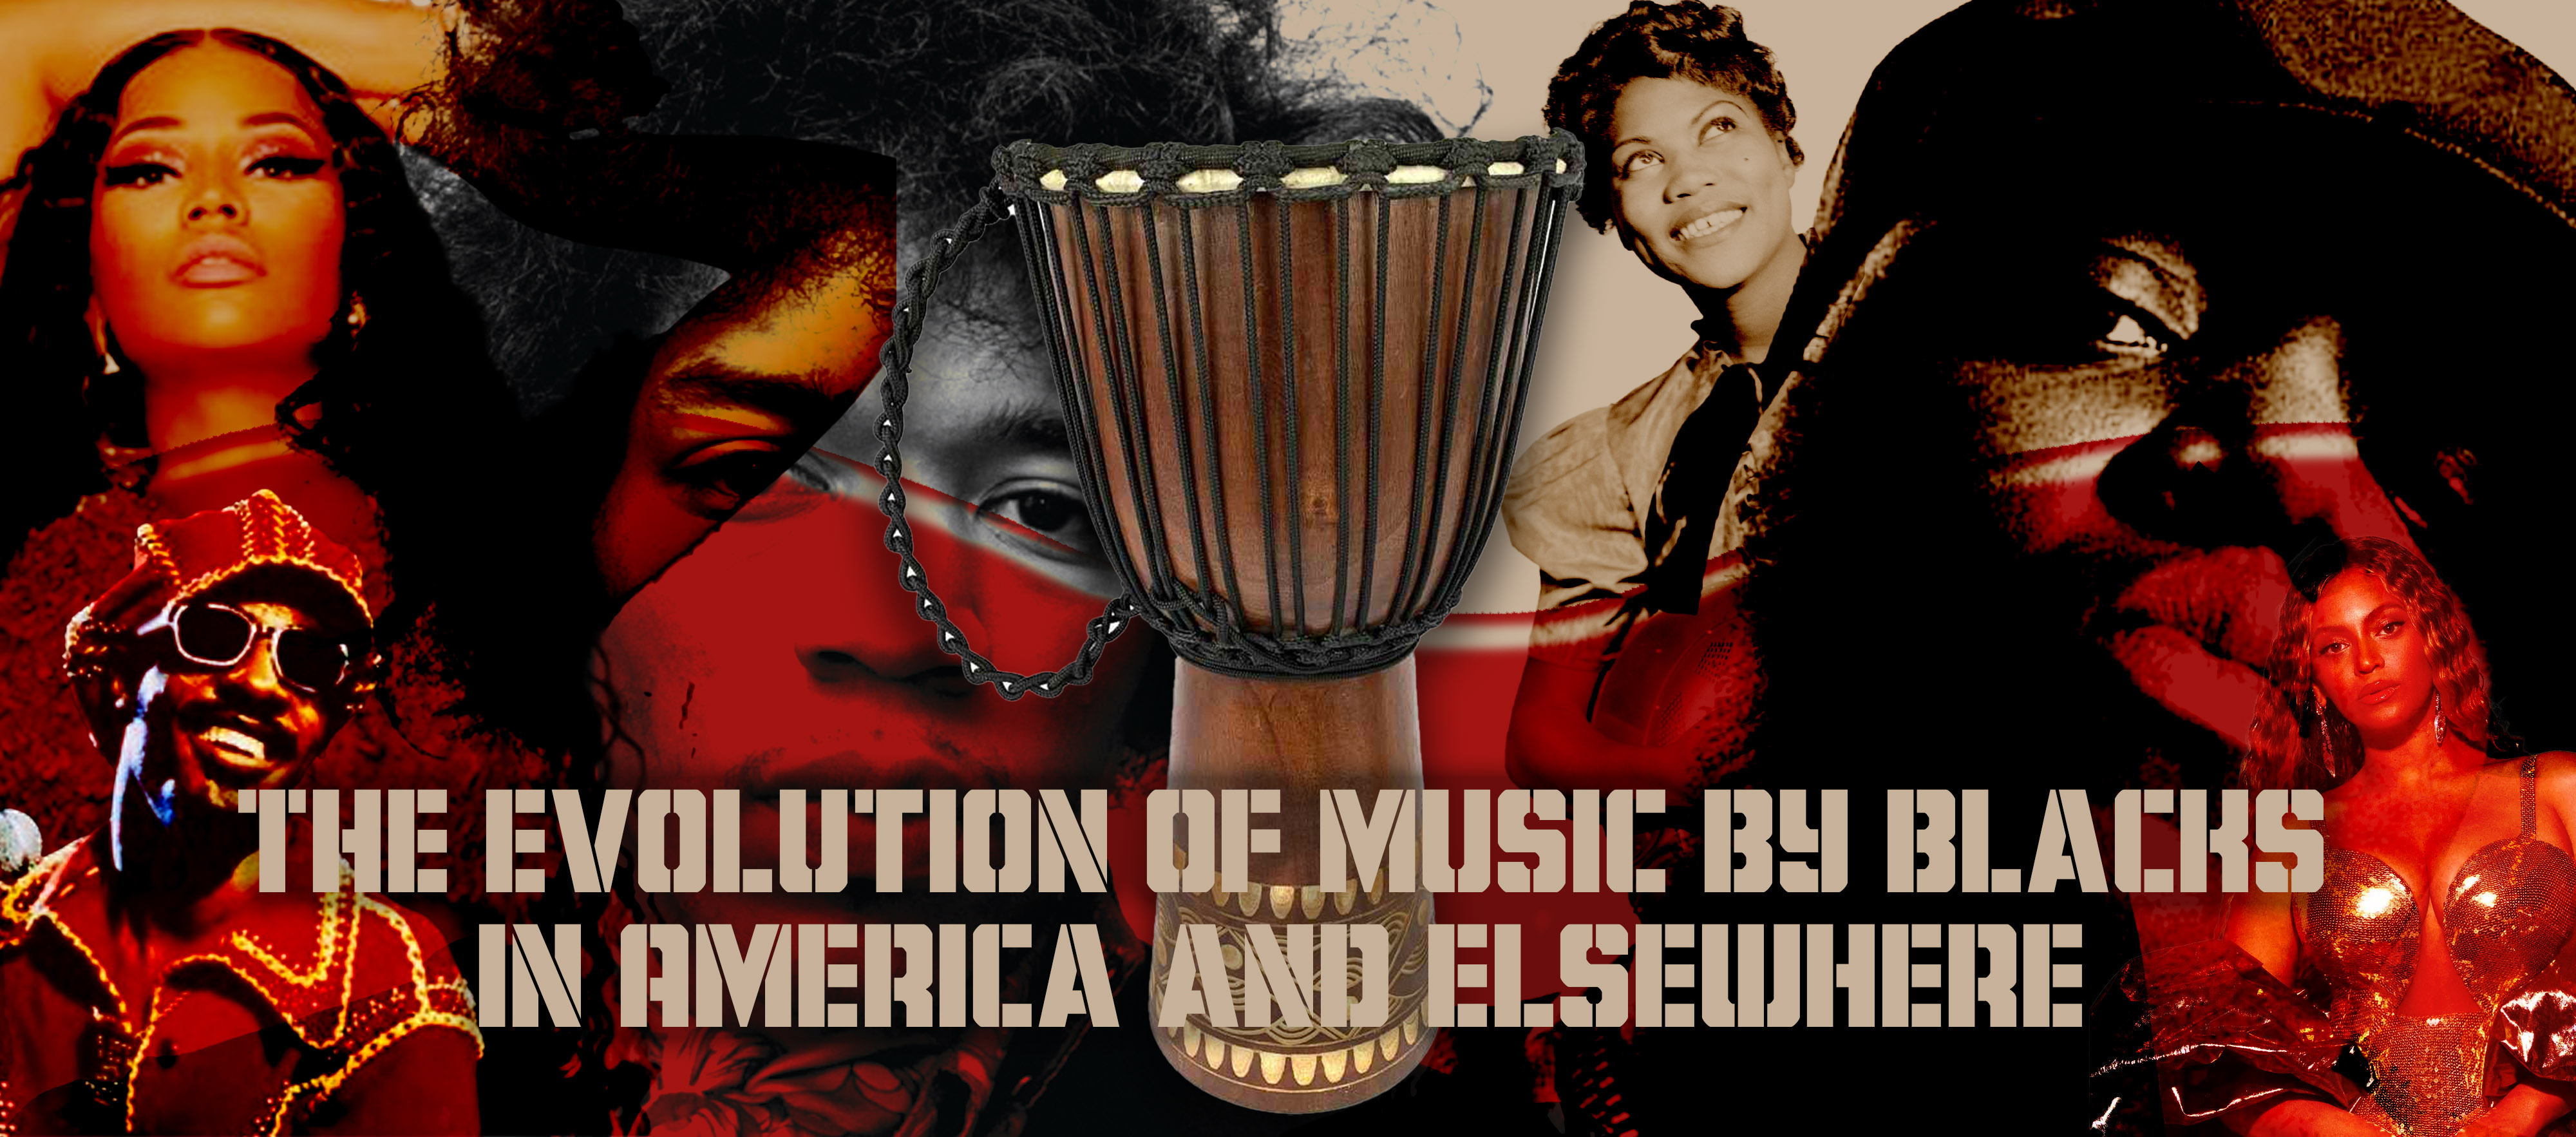 The Evolution of Music by Blacks in America and Elsewhere